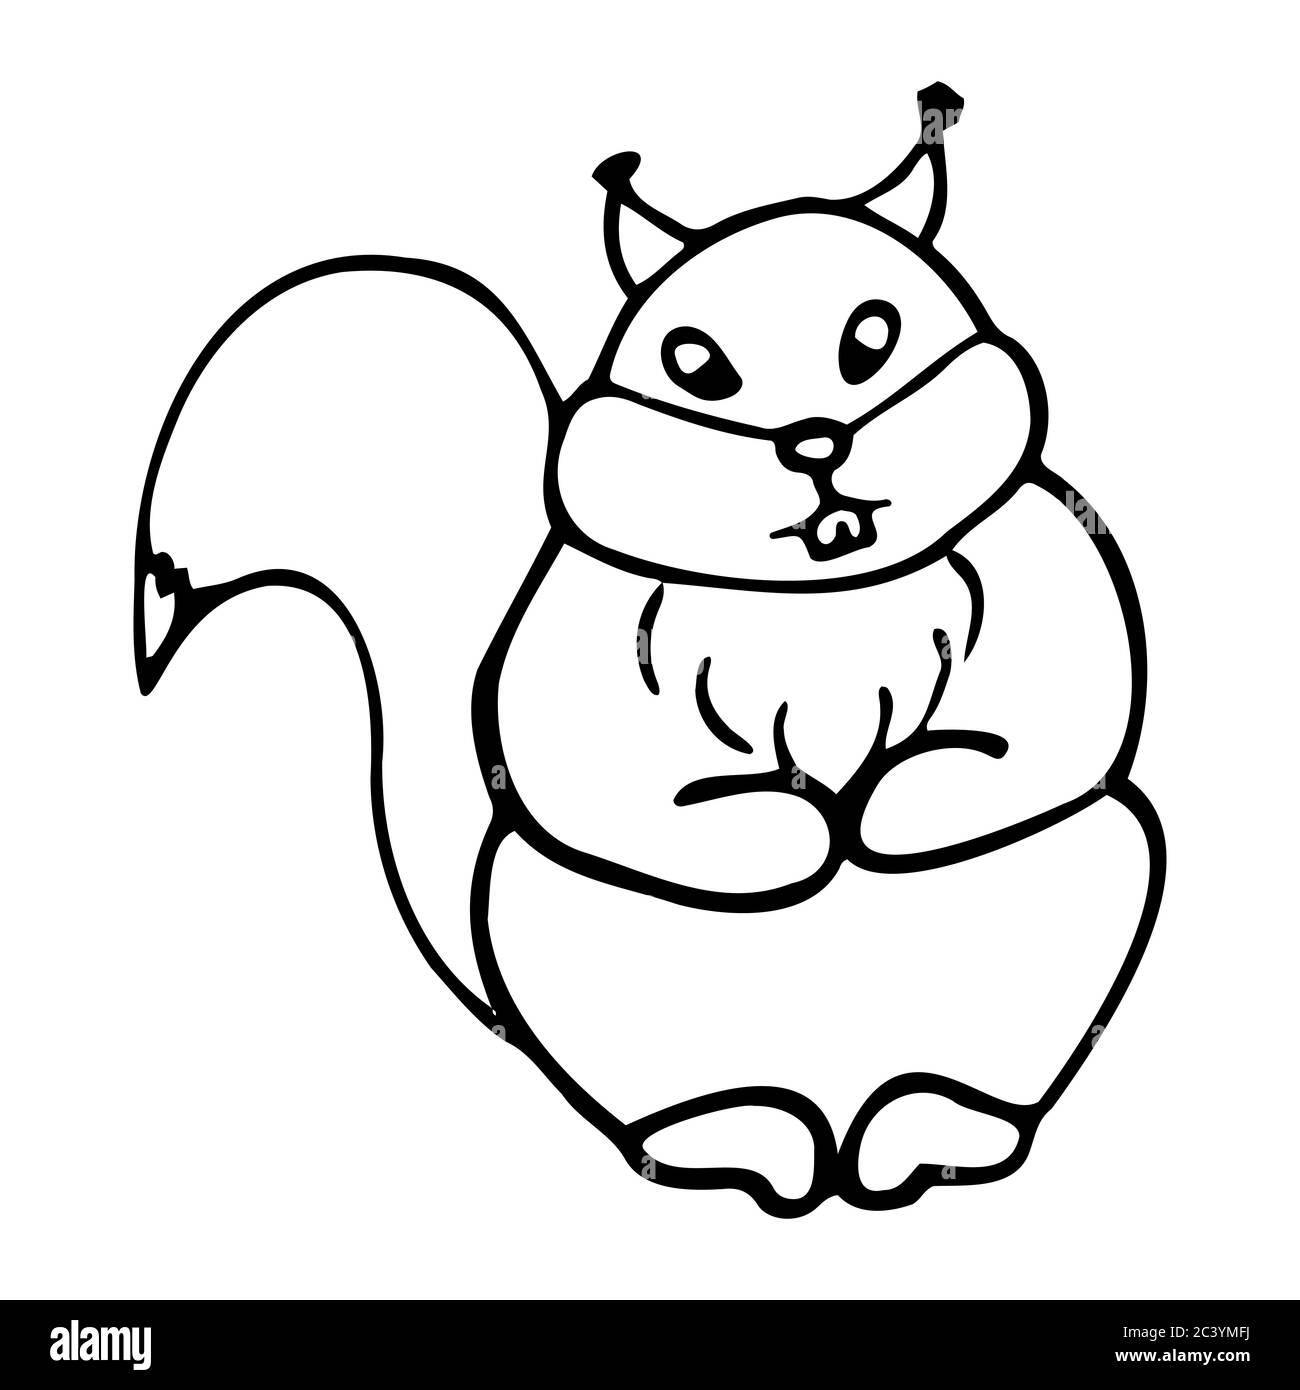 Cartoon squirrel Black and White Stock Photos & Images - Alamy